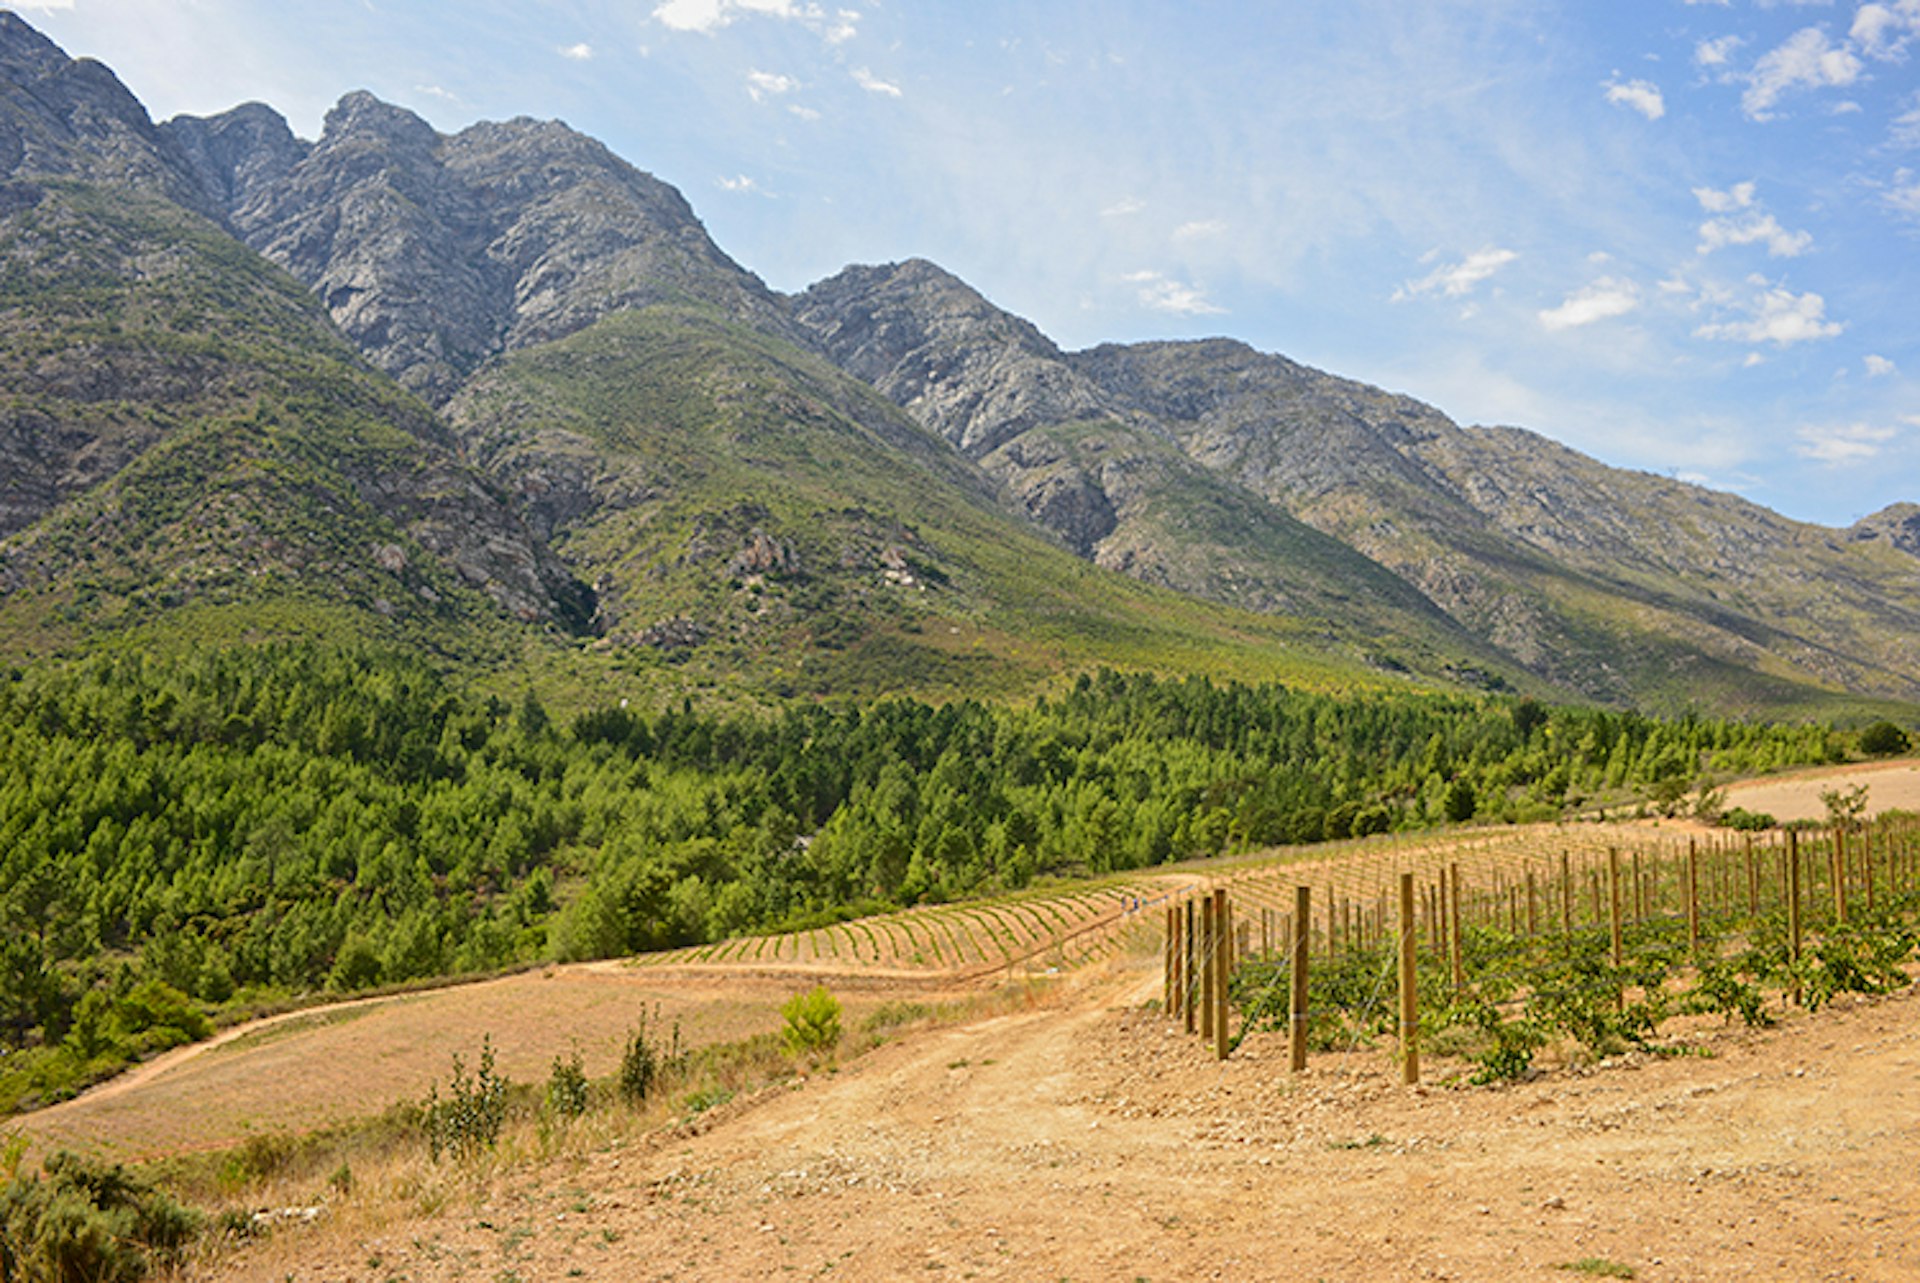 The Tulbagh Valley